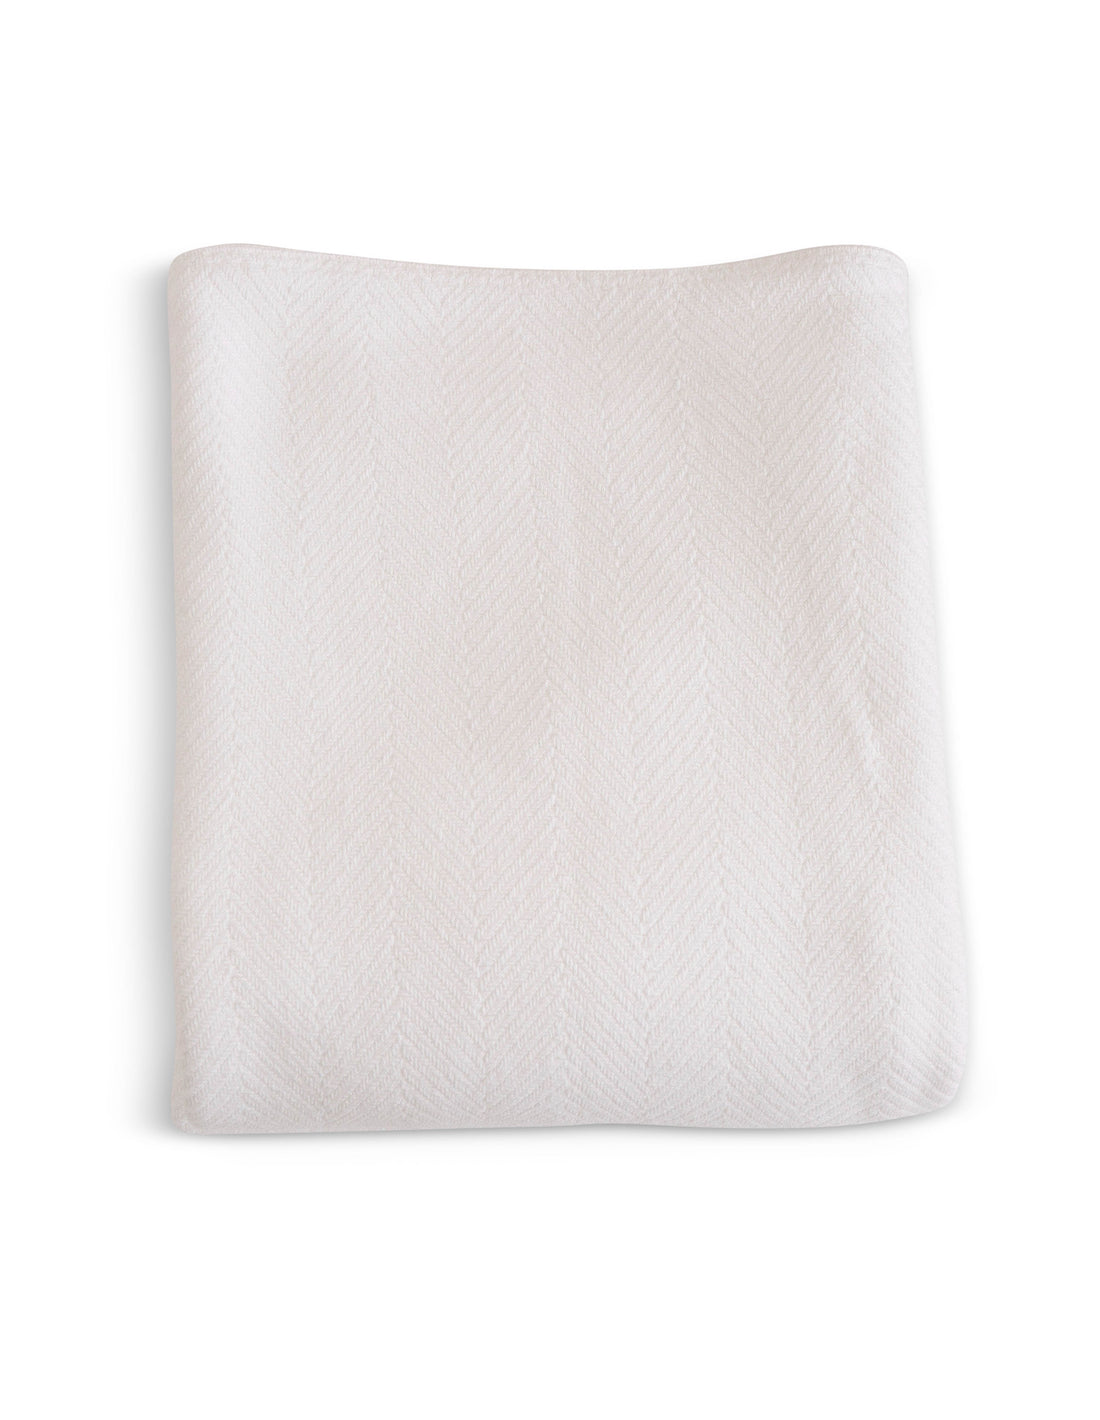 Evangeline Bright white 100% cotton herringbone woven blanket, folded. Sizes twin, full/queen, and king. The breathable quality of cotton with the weight and warmth of a wool blanket.